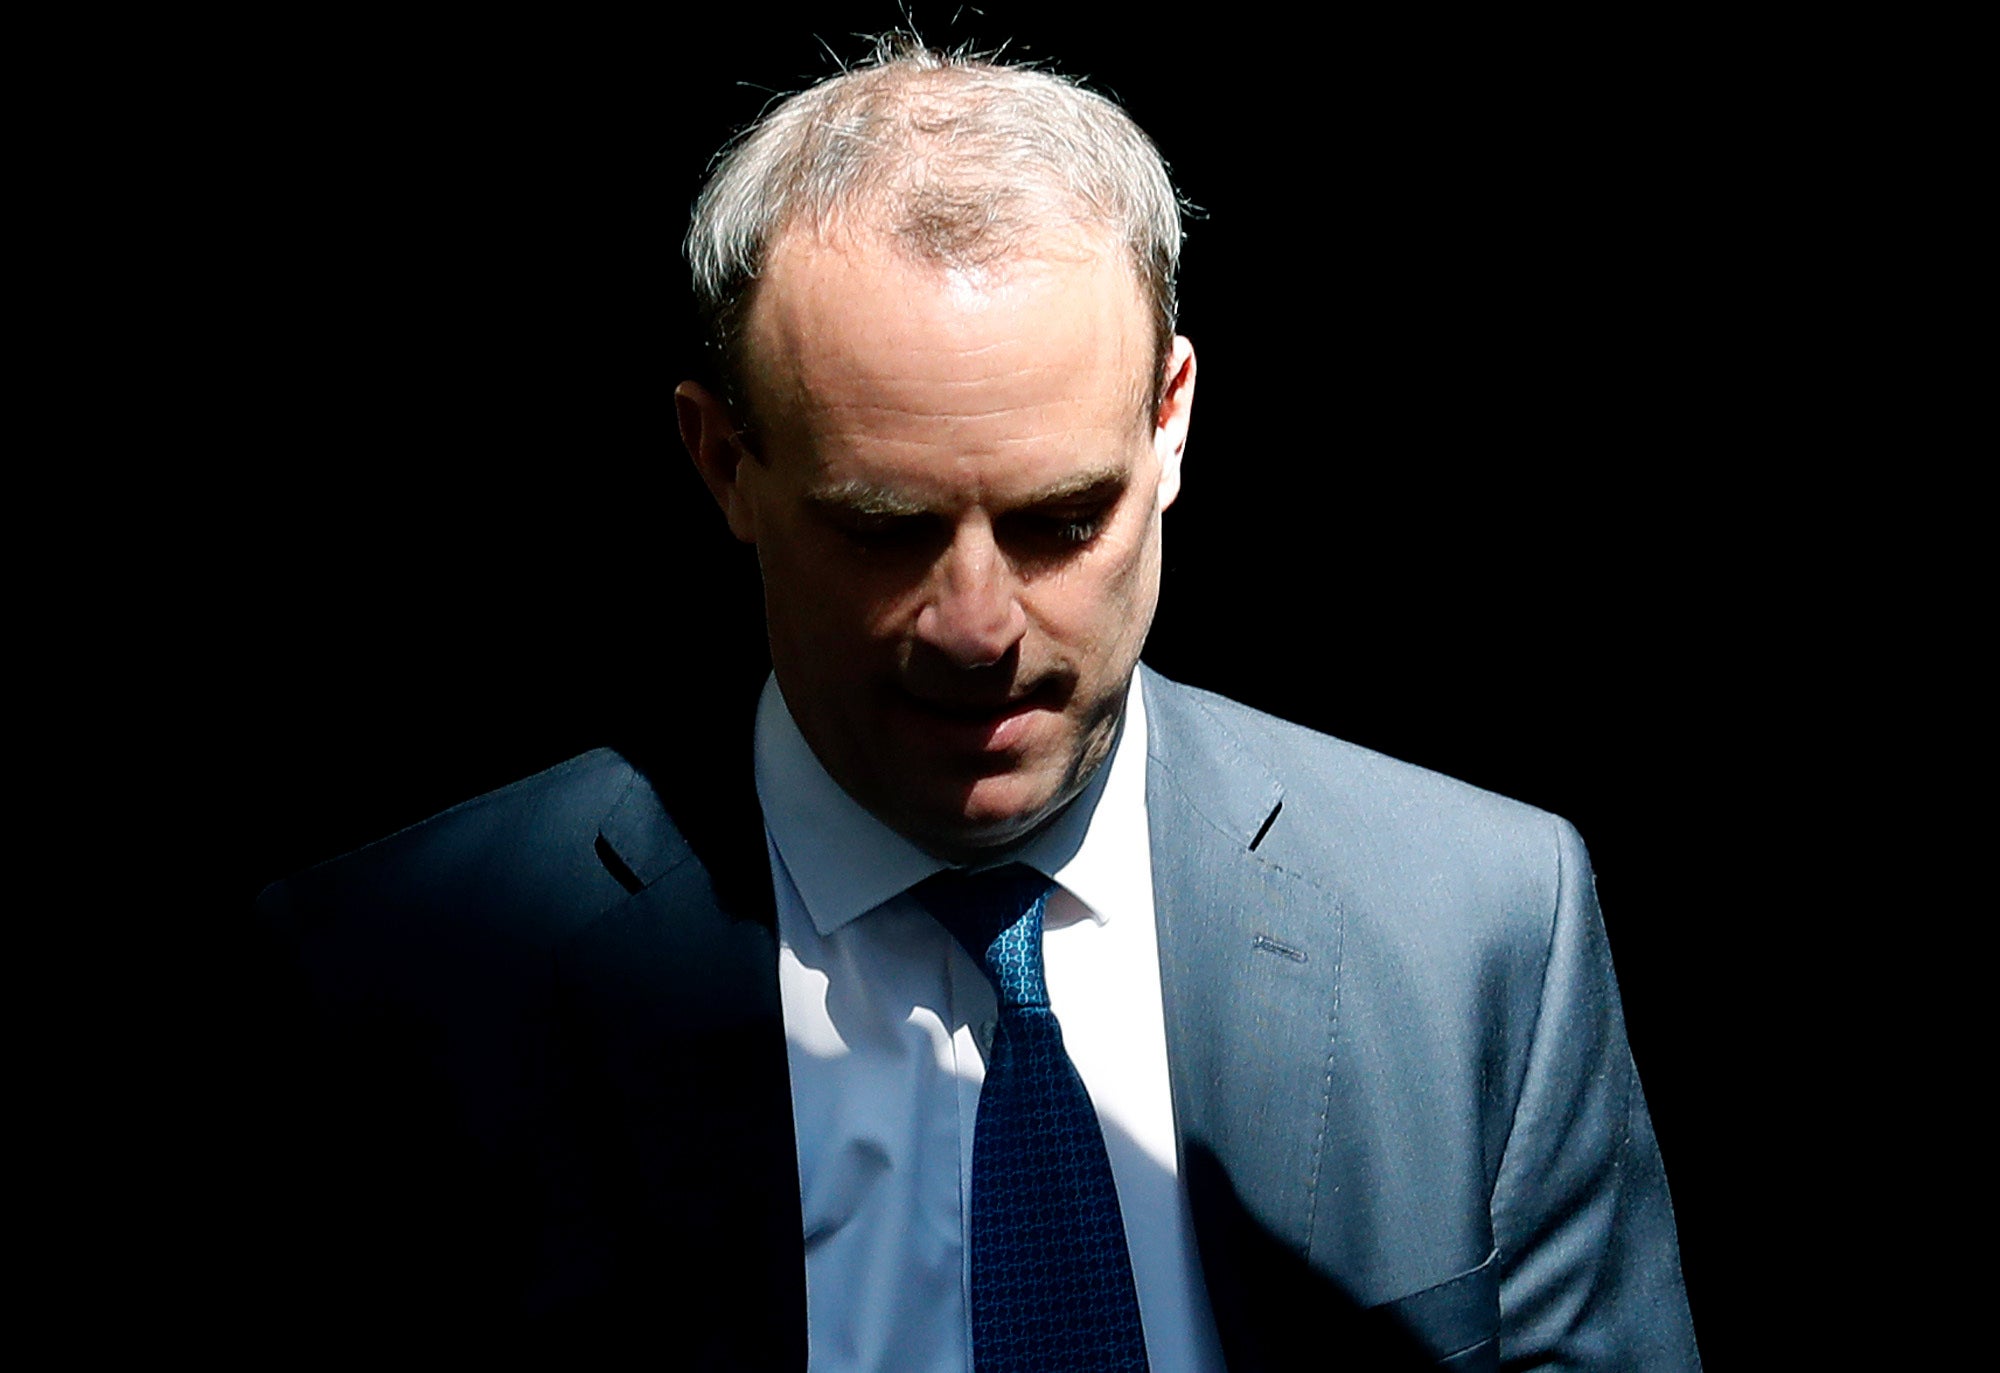 Dominic Raab’s resignation has raised fresh questions over parts of the bill he created